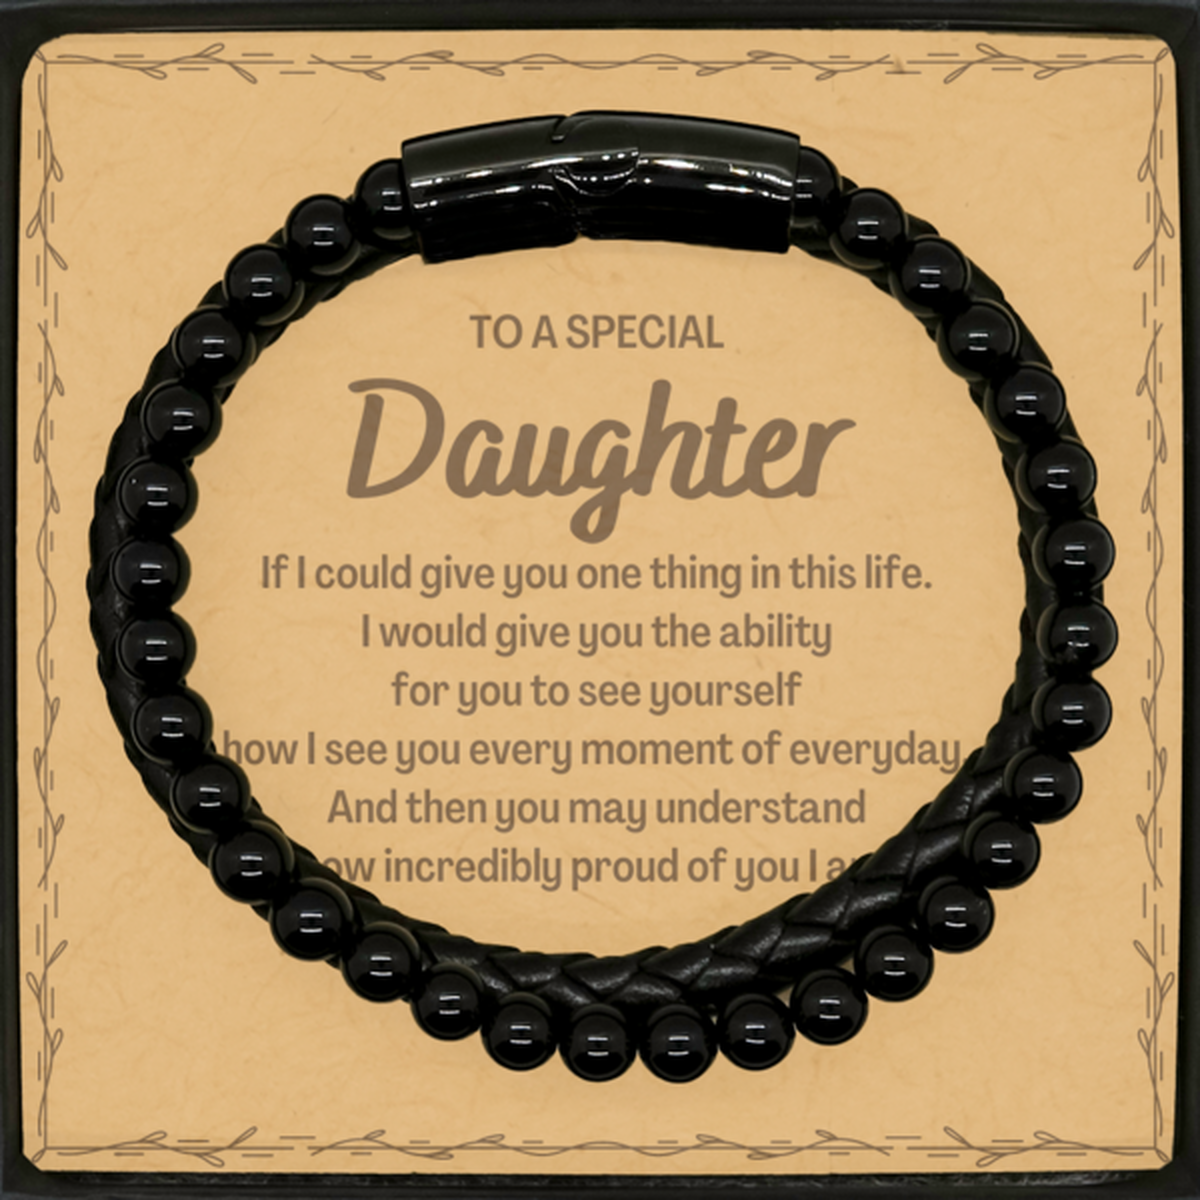 To My Daughter Stone Leather Bracelets, Gifts For Daughter Message Card, Inspirational Gifts for Christmas Birthday, Epic Gifts for Daughter To A Special Daughter how incredibly proud of you I am